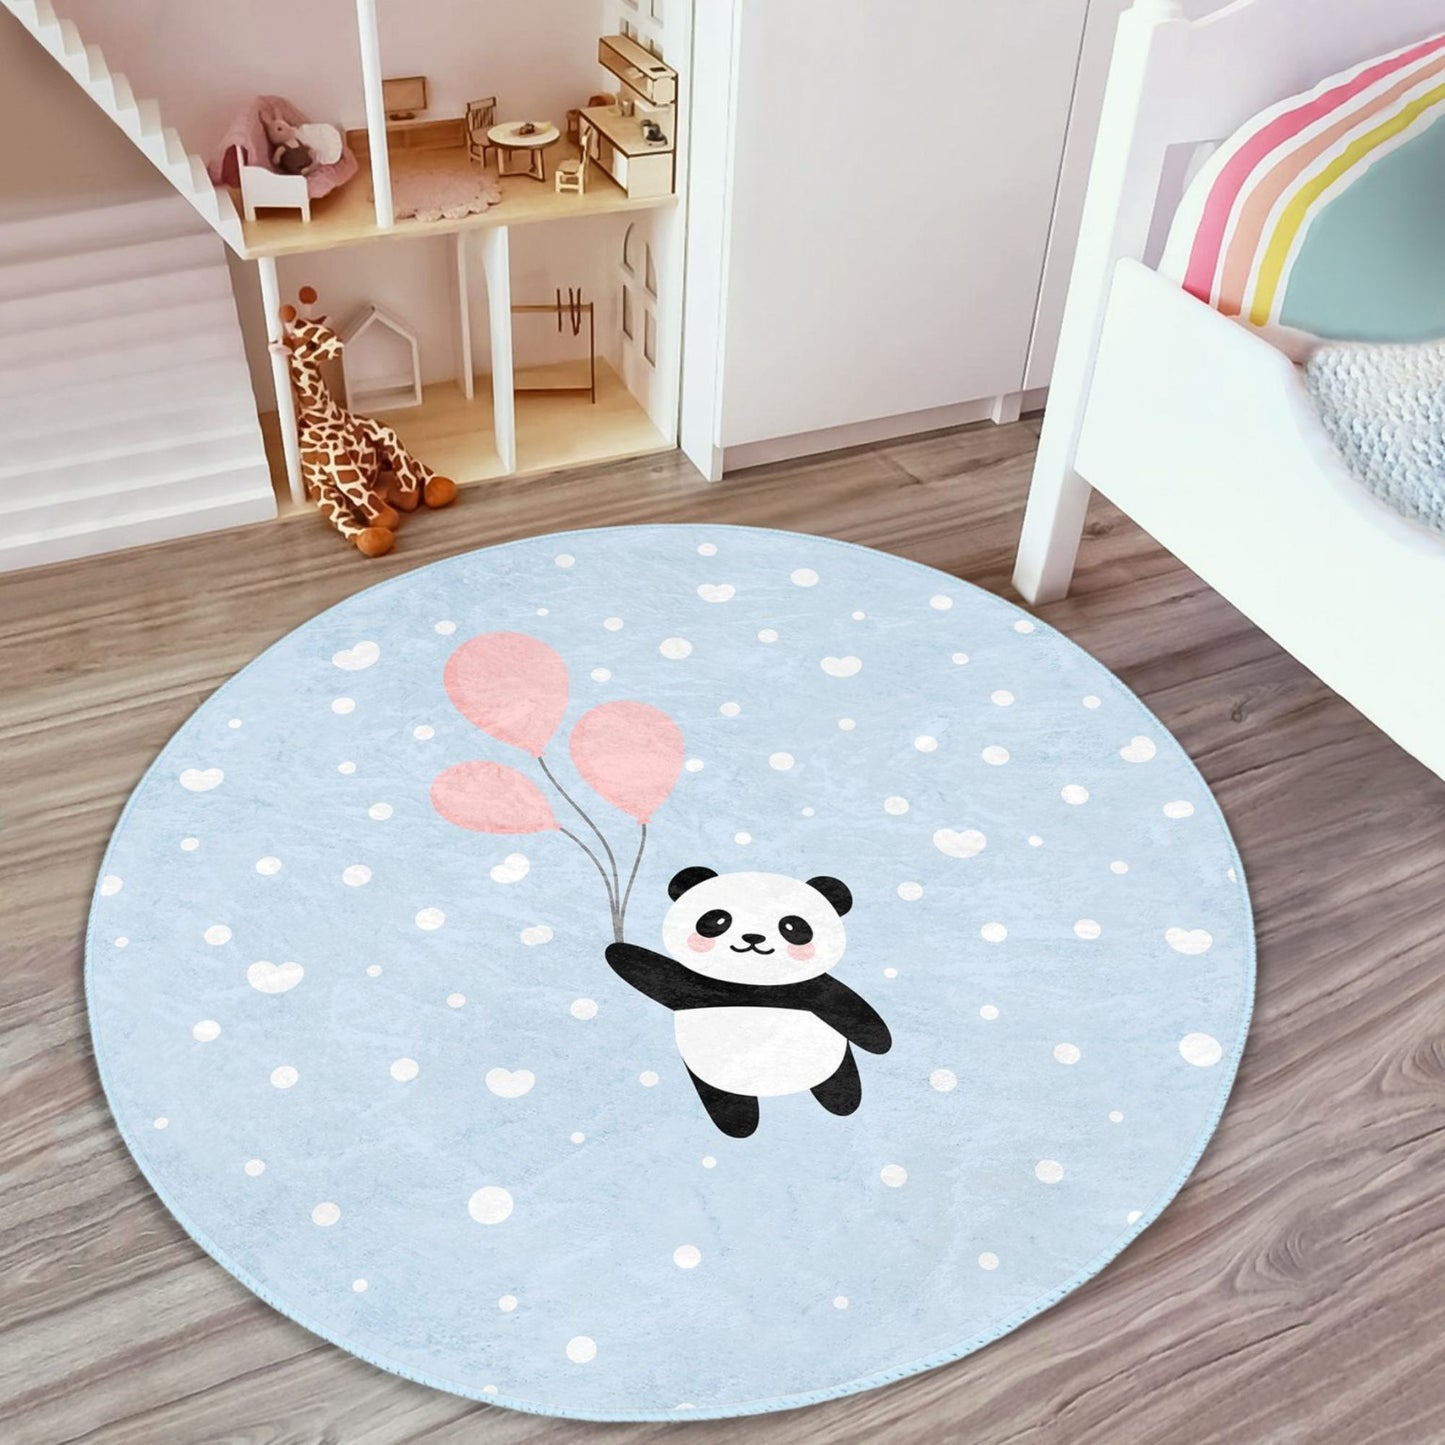 Rug with Whimsical Panda Flying with Balloons Pattern